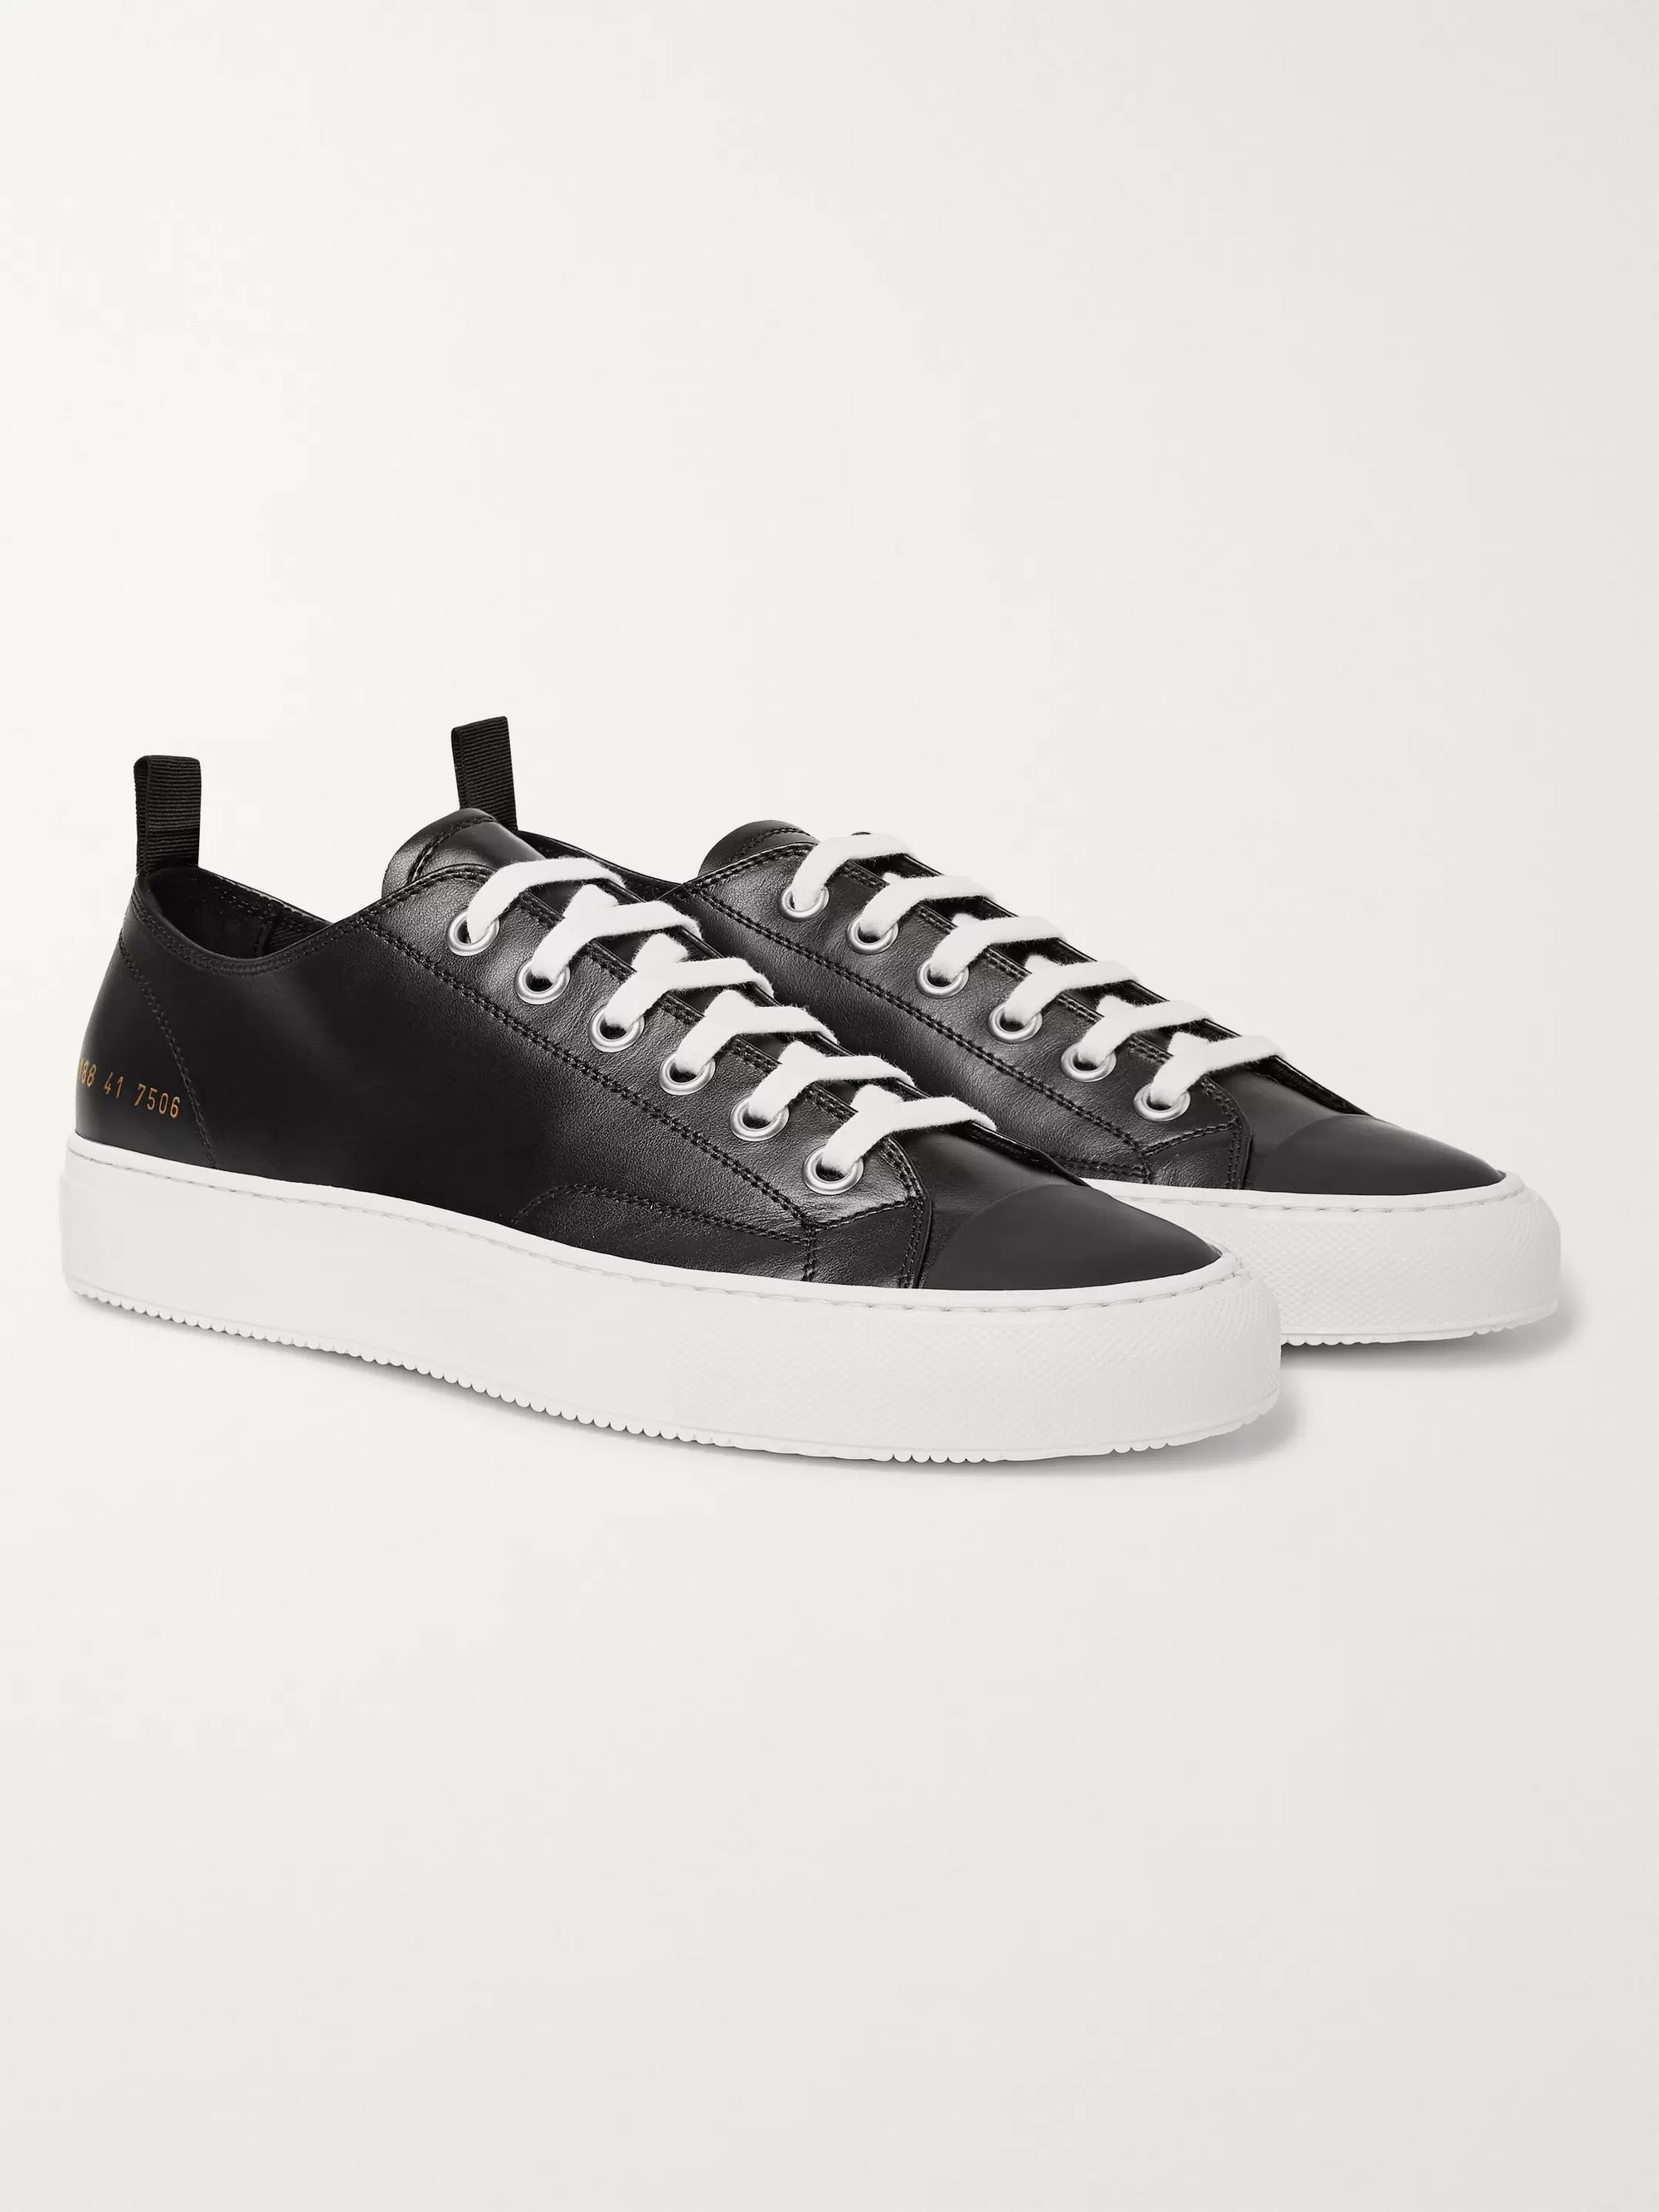 Black Tournament Leather Sneakers 